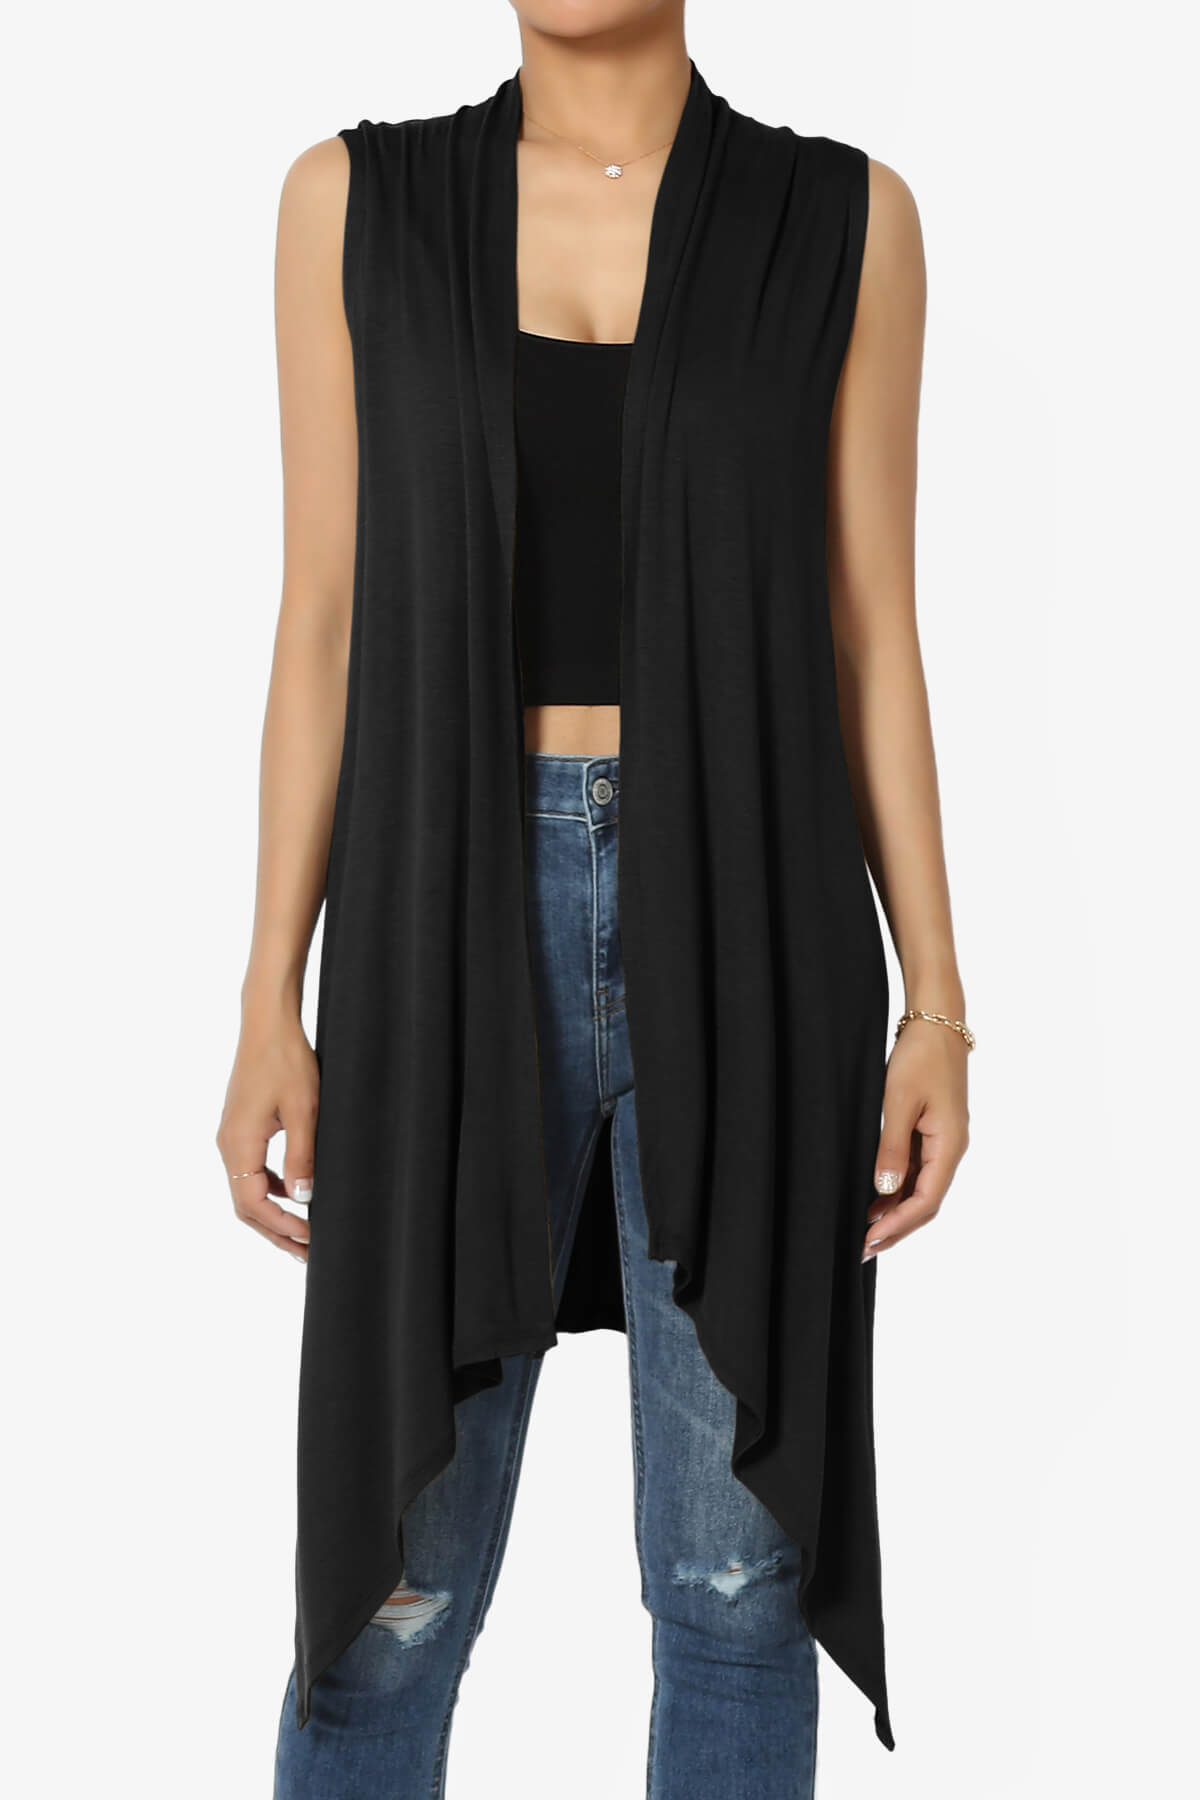 Load image into Gallery viewer, Taysom Draped Open Front Sleeveless Cardigan Vest BLACK_1
